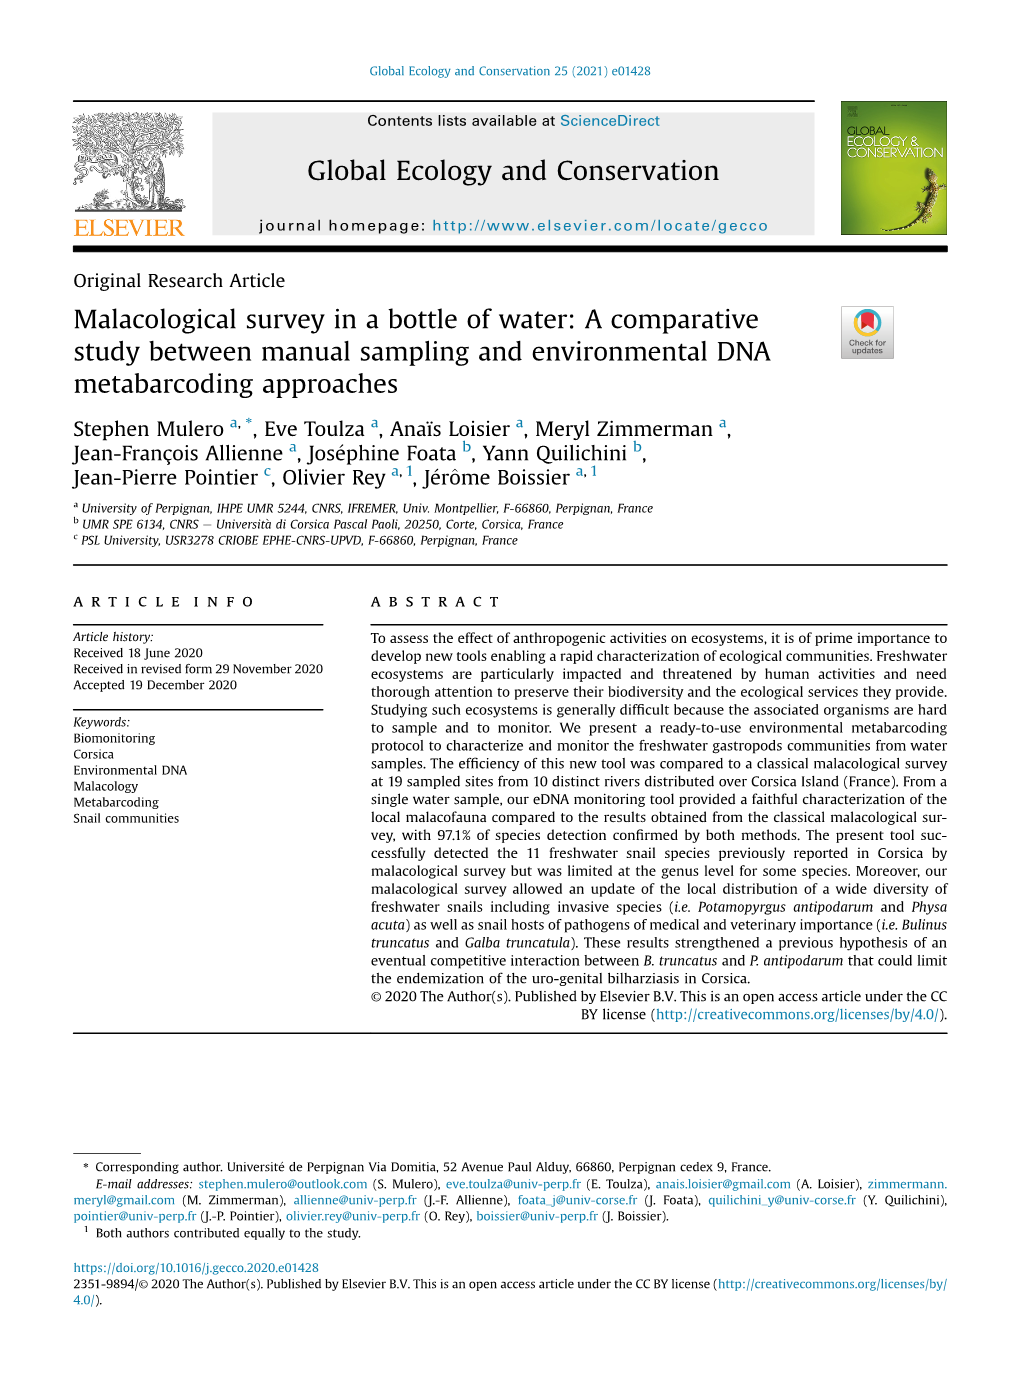 Malacological Survey in a Bottle of Water: a Comparative Study Between Manual Sampling and Environmental DNA Metabarcoding Approaches